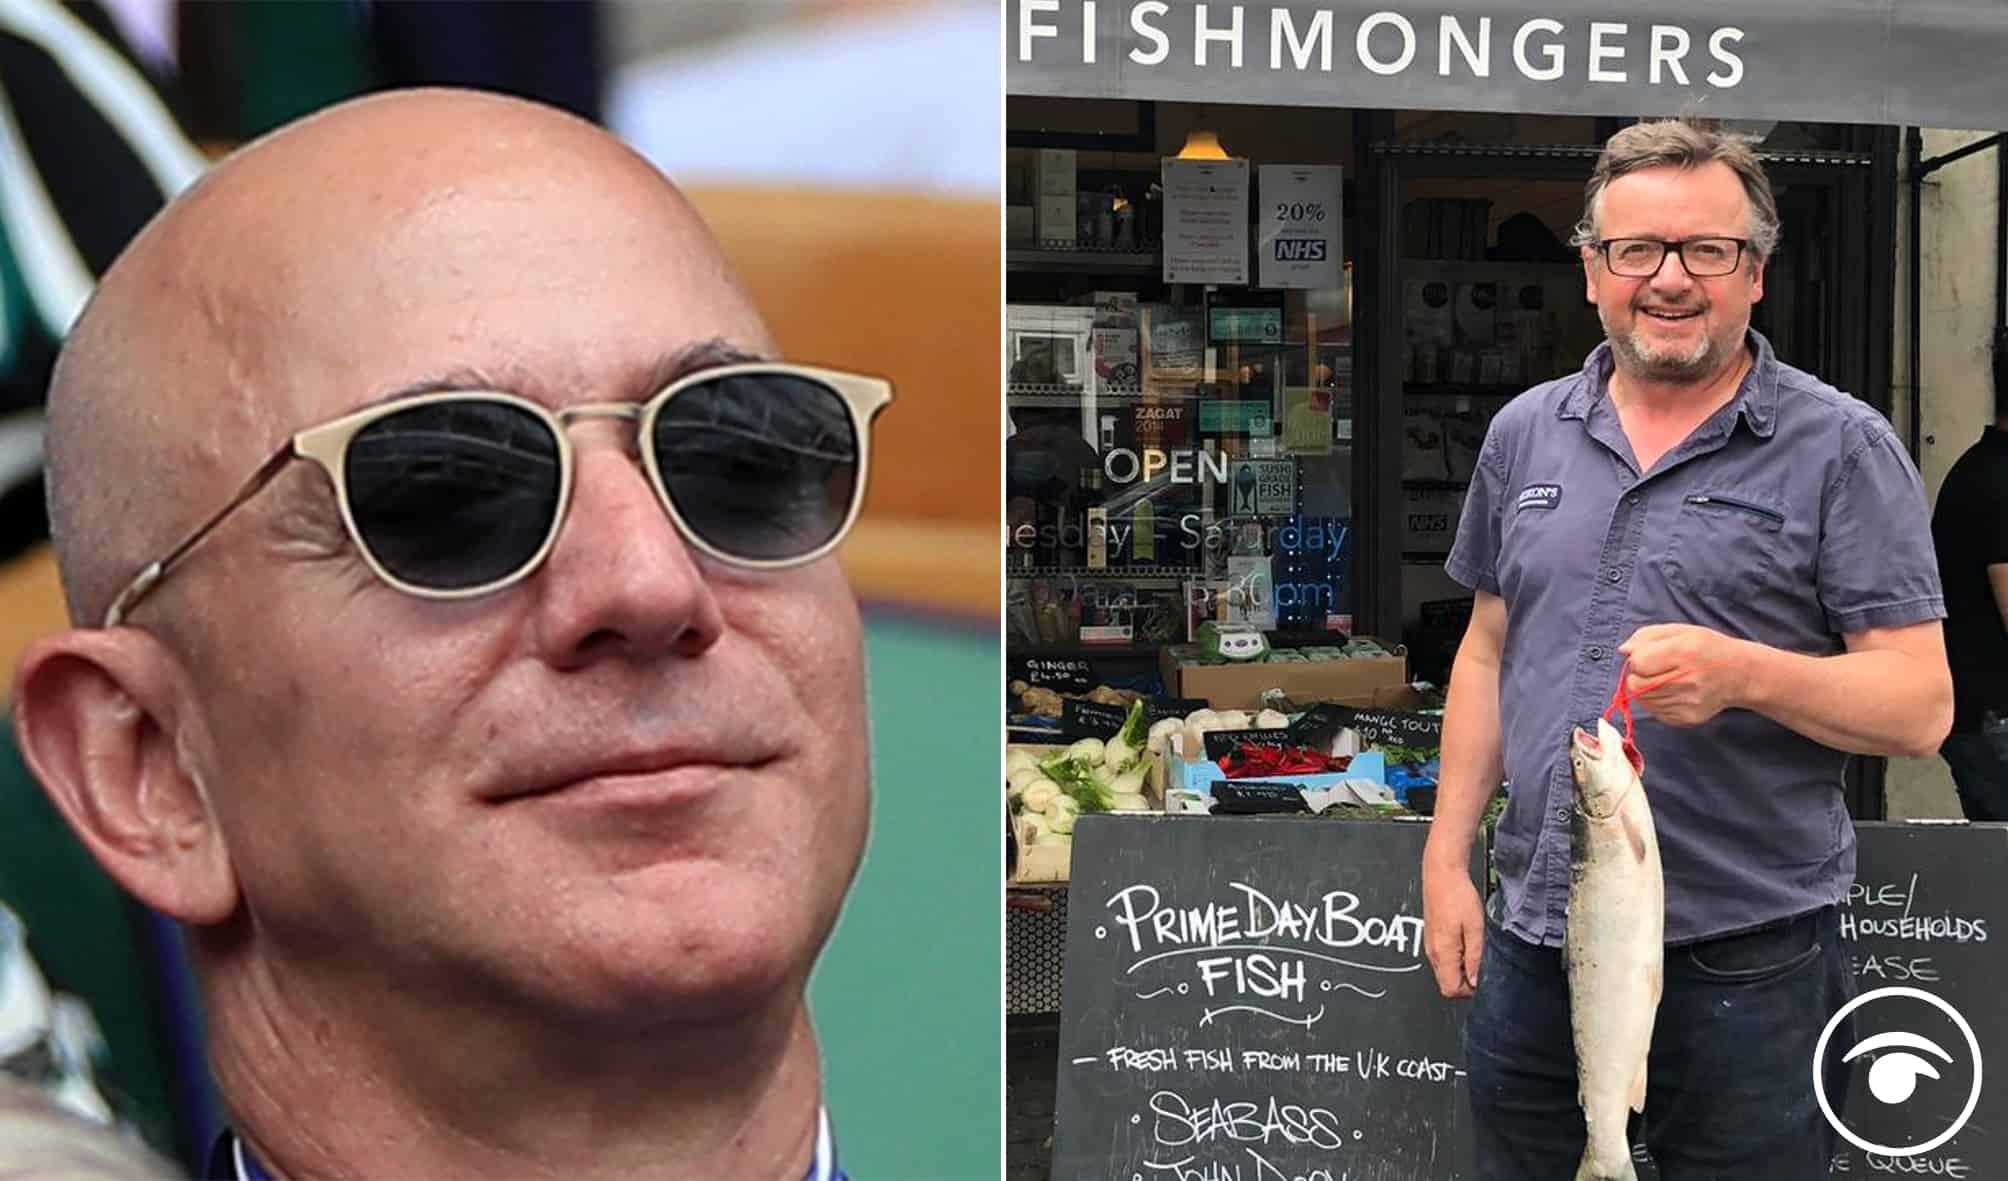 ‘Prime day:’ Fish sellers used phrase before Jeff Bezos ‘was a glint in his mother’s eye,’ after legal notice sent